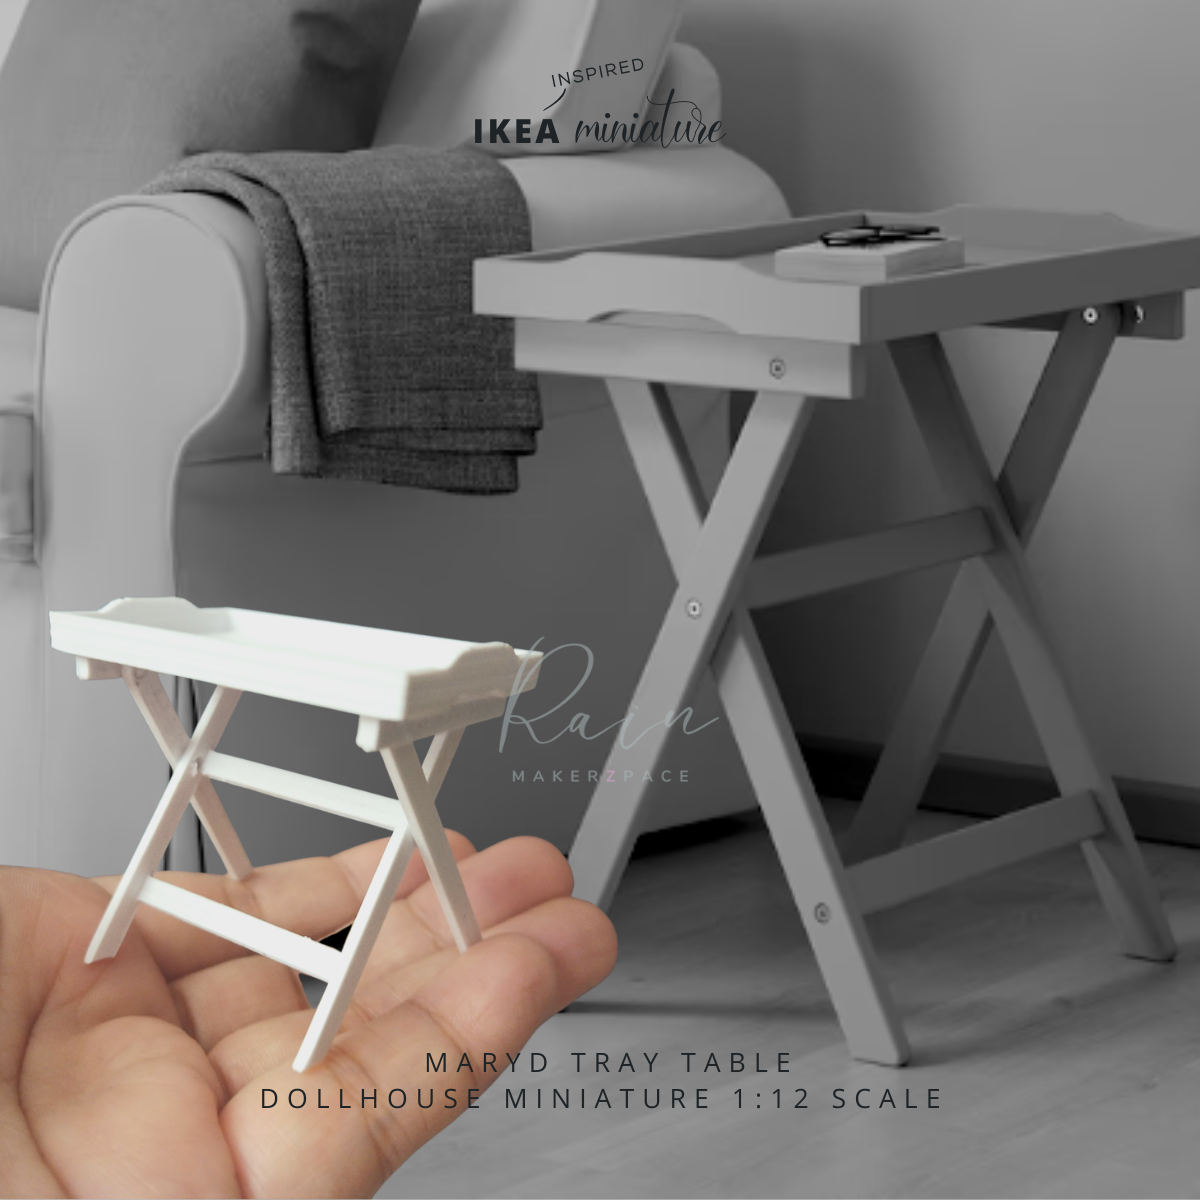 D TpRiARYS eASEge re MINIATURE 1:12 SCALE STL file Table, Miniature IKEA-INSPIRED MARYD Tray table for 1:12 Dollhouse・3D print design to download, RAIN